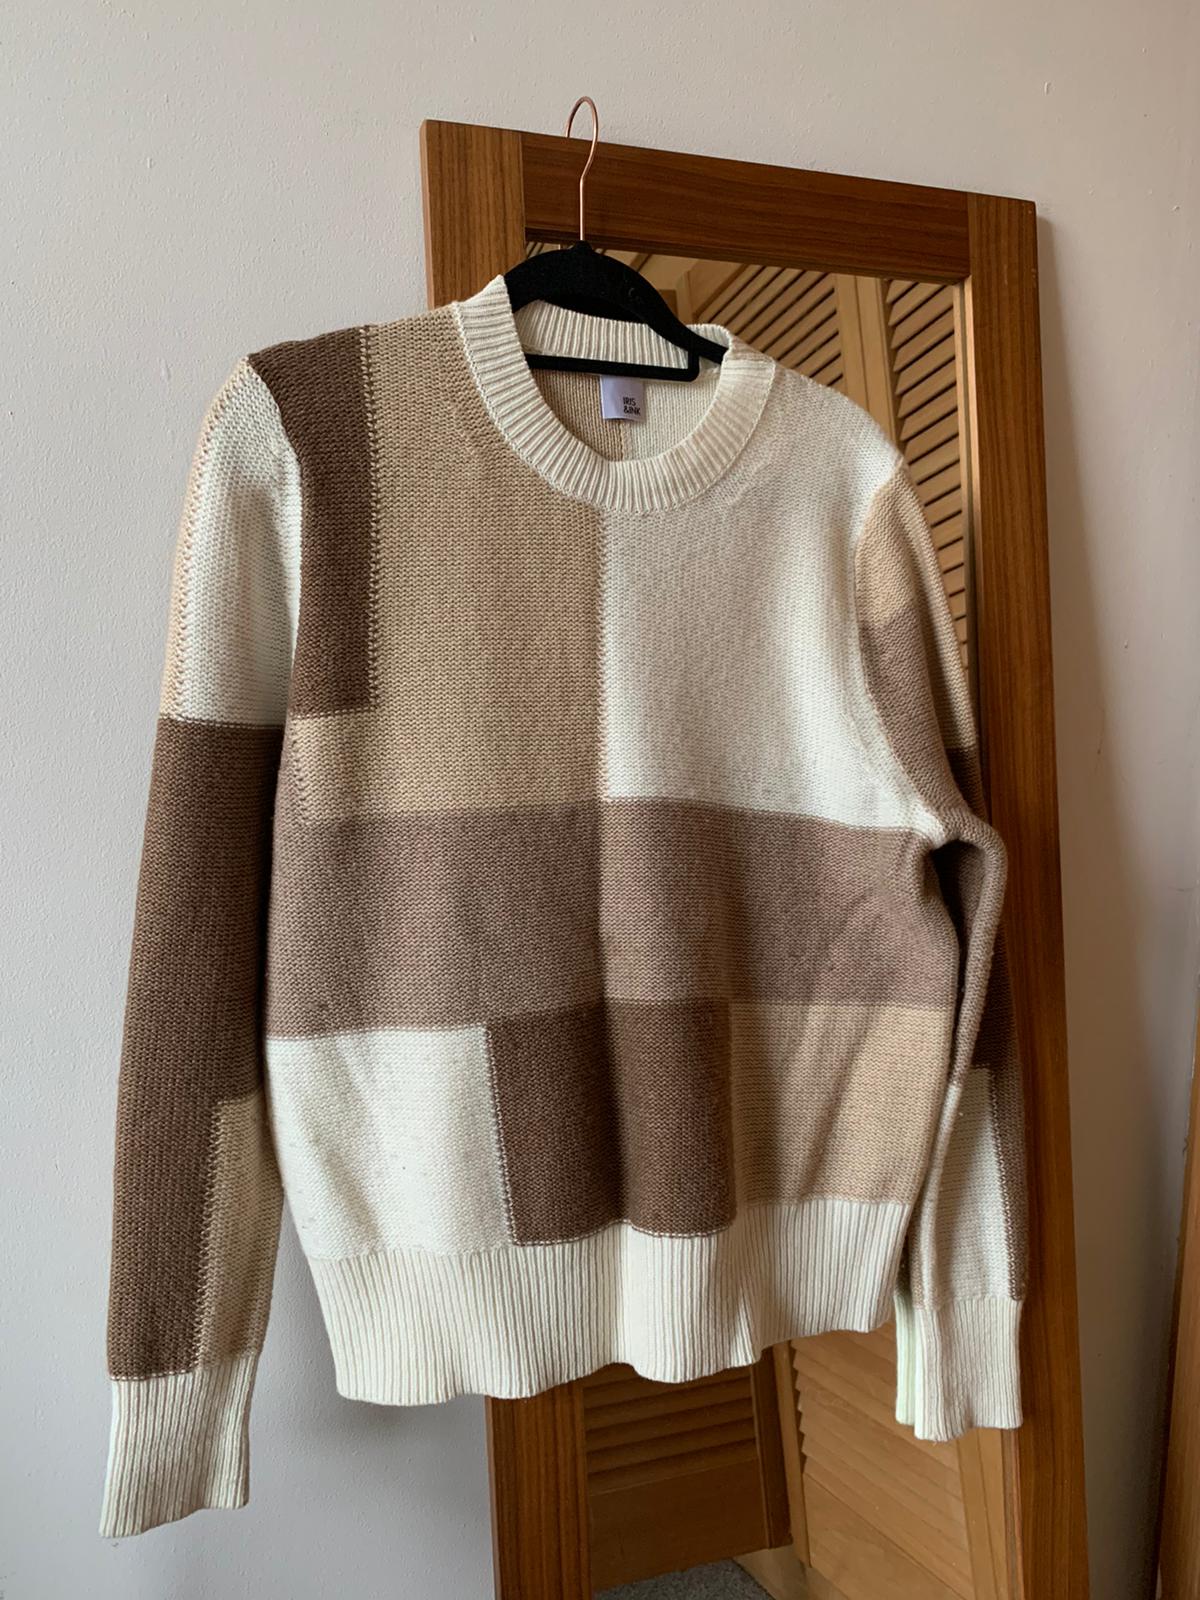 BNWT nothing wrong they are just too small for me - Depop